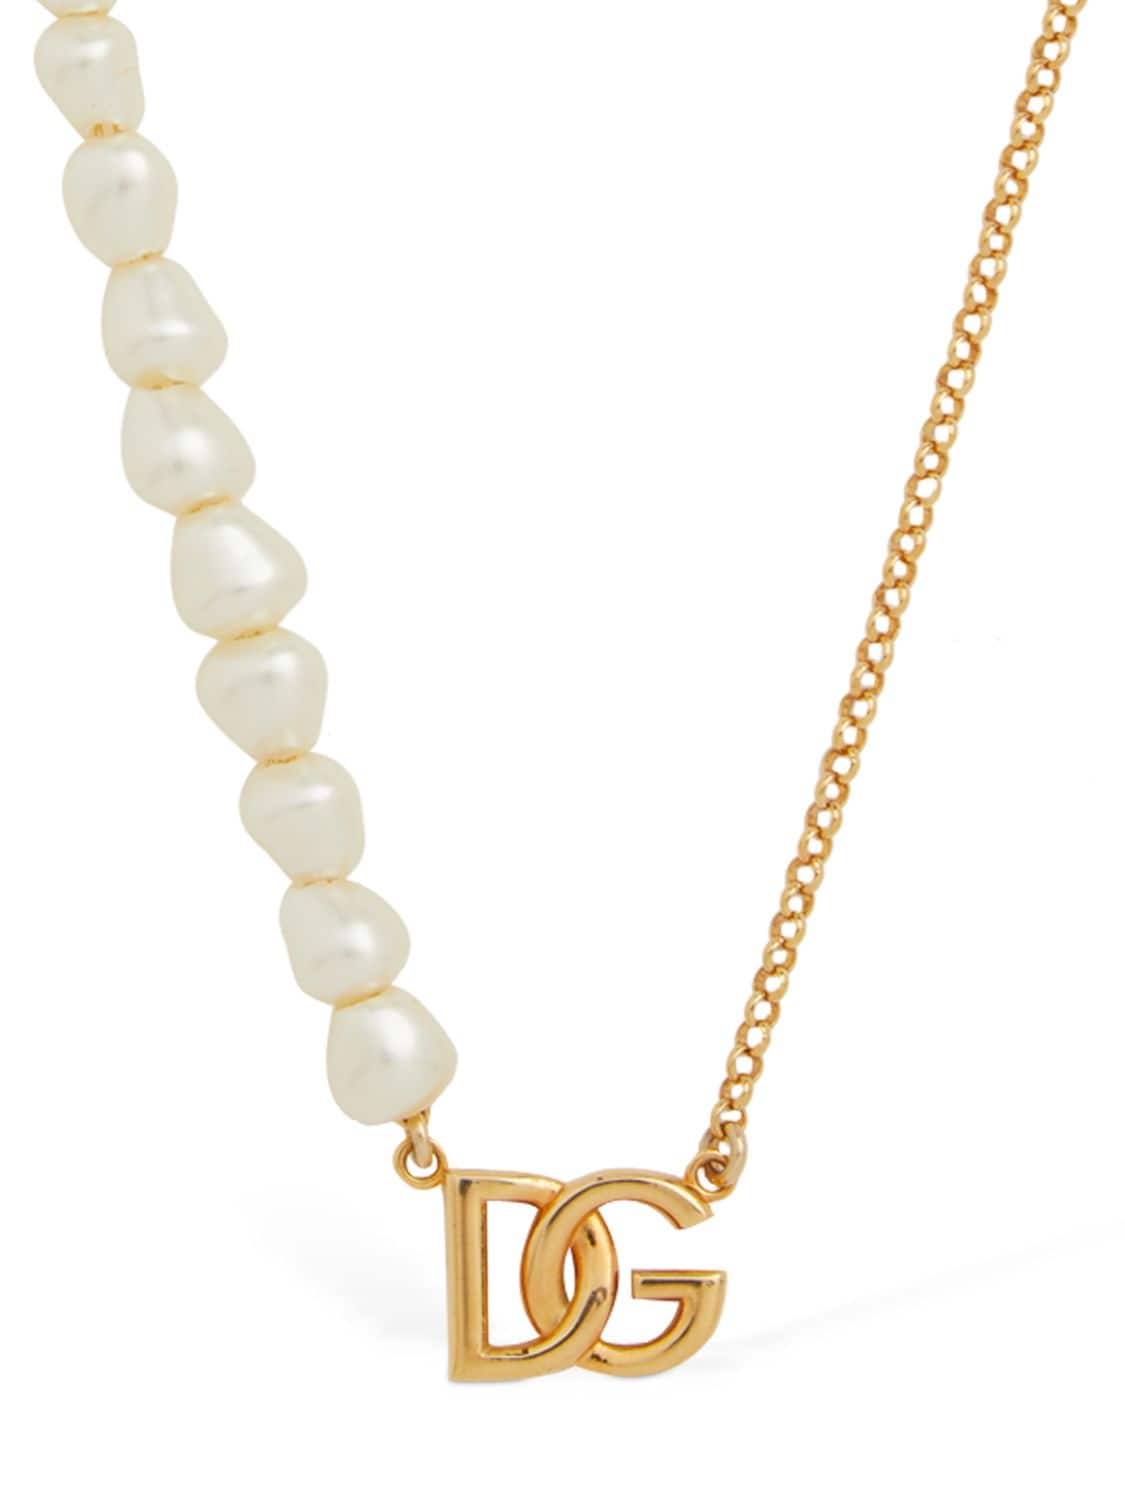 Chanel Faux Pearls Necklace. Signed